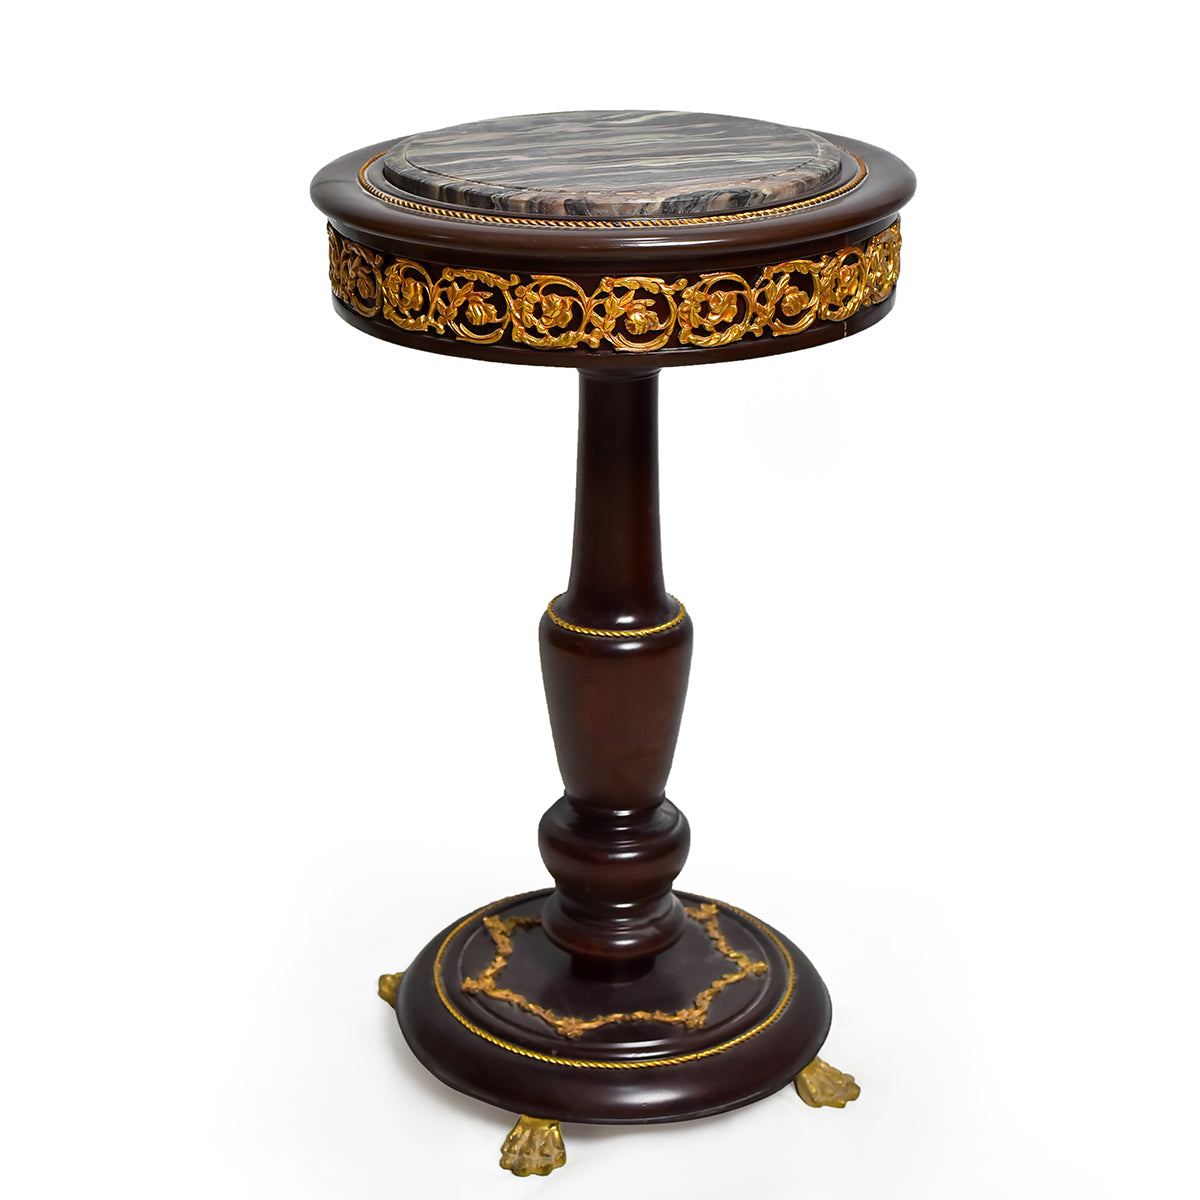 Pair of Louis XVI Style Side Tables (2 set)